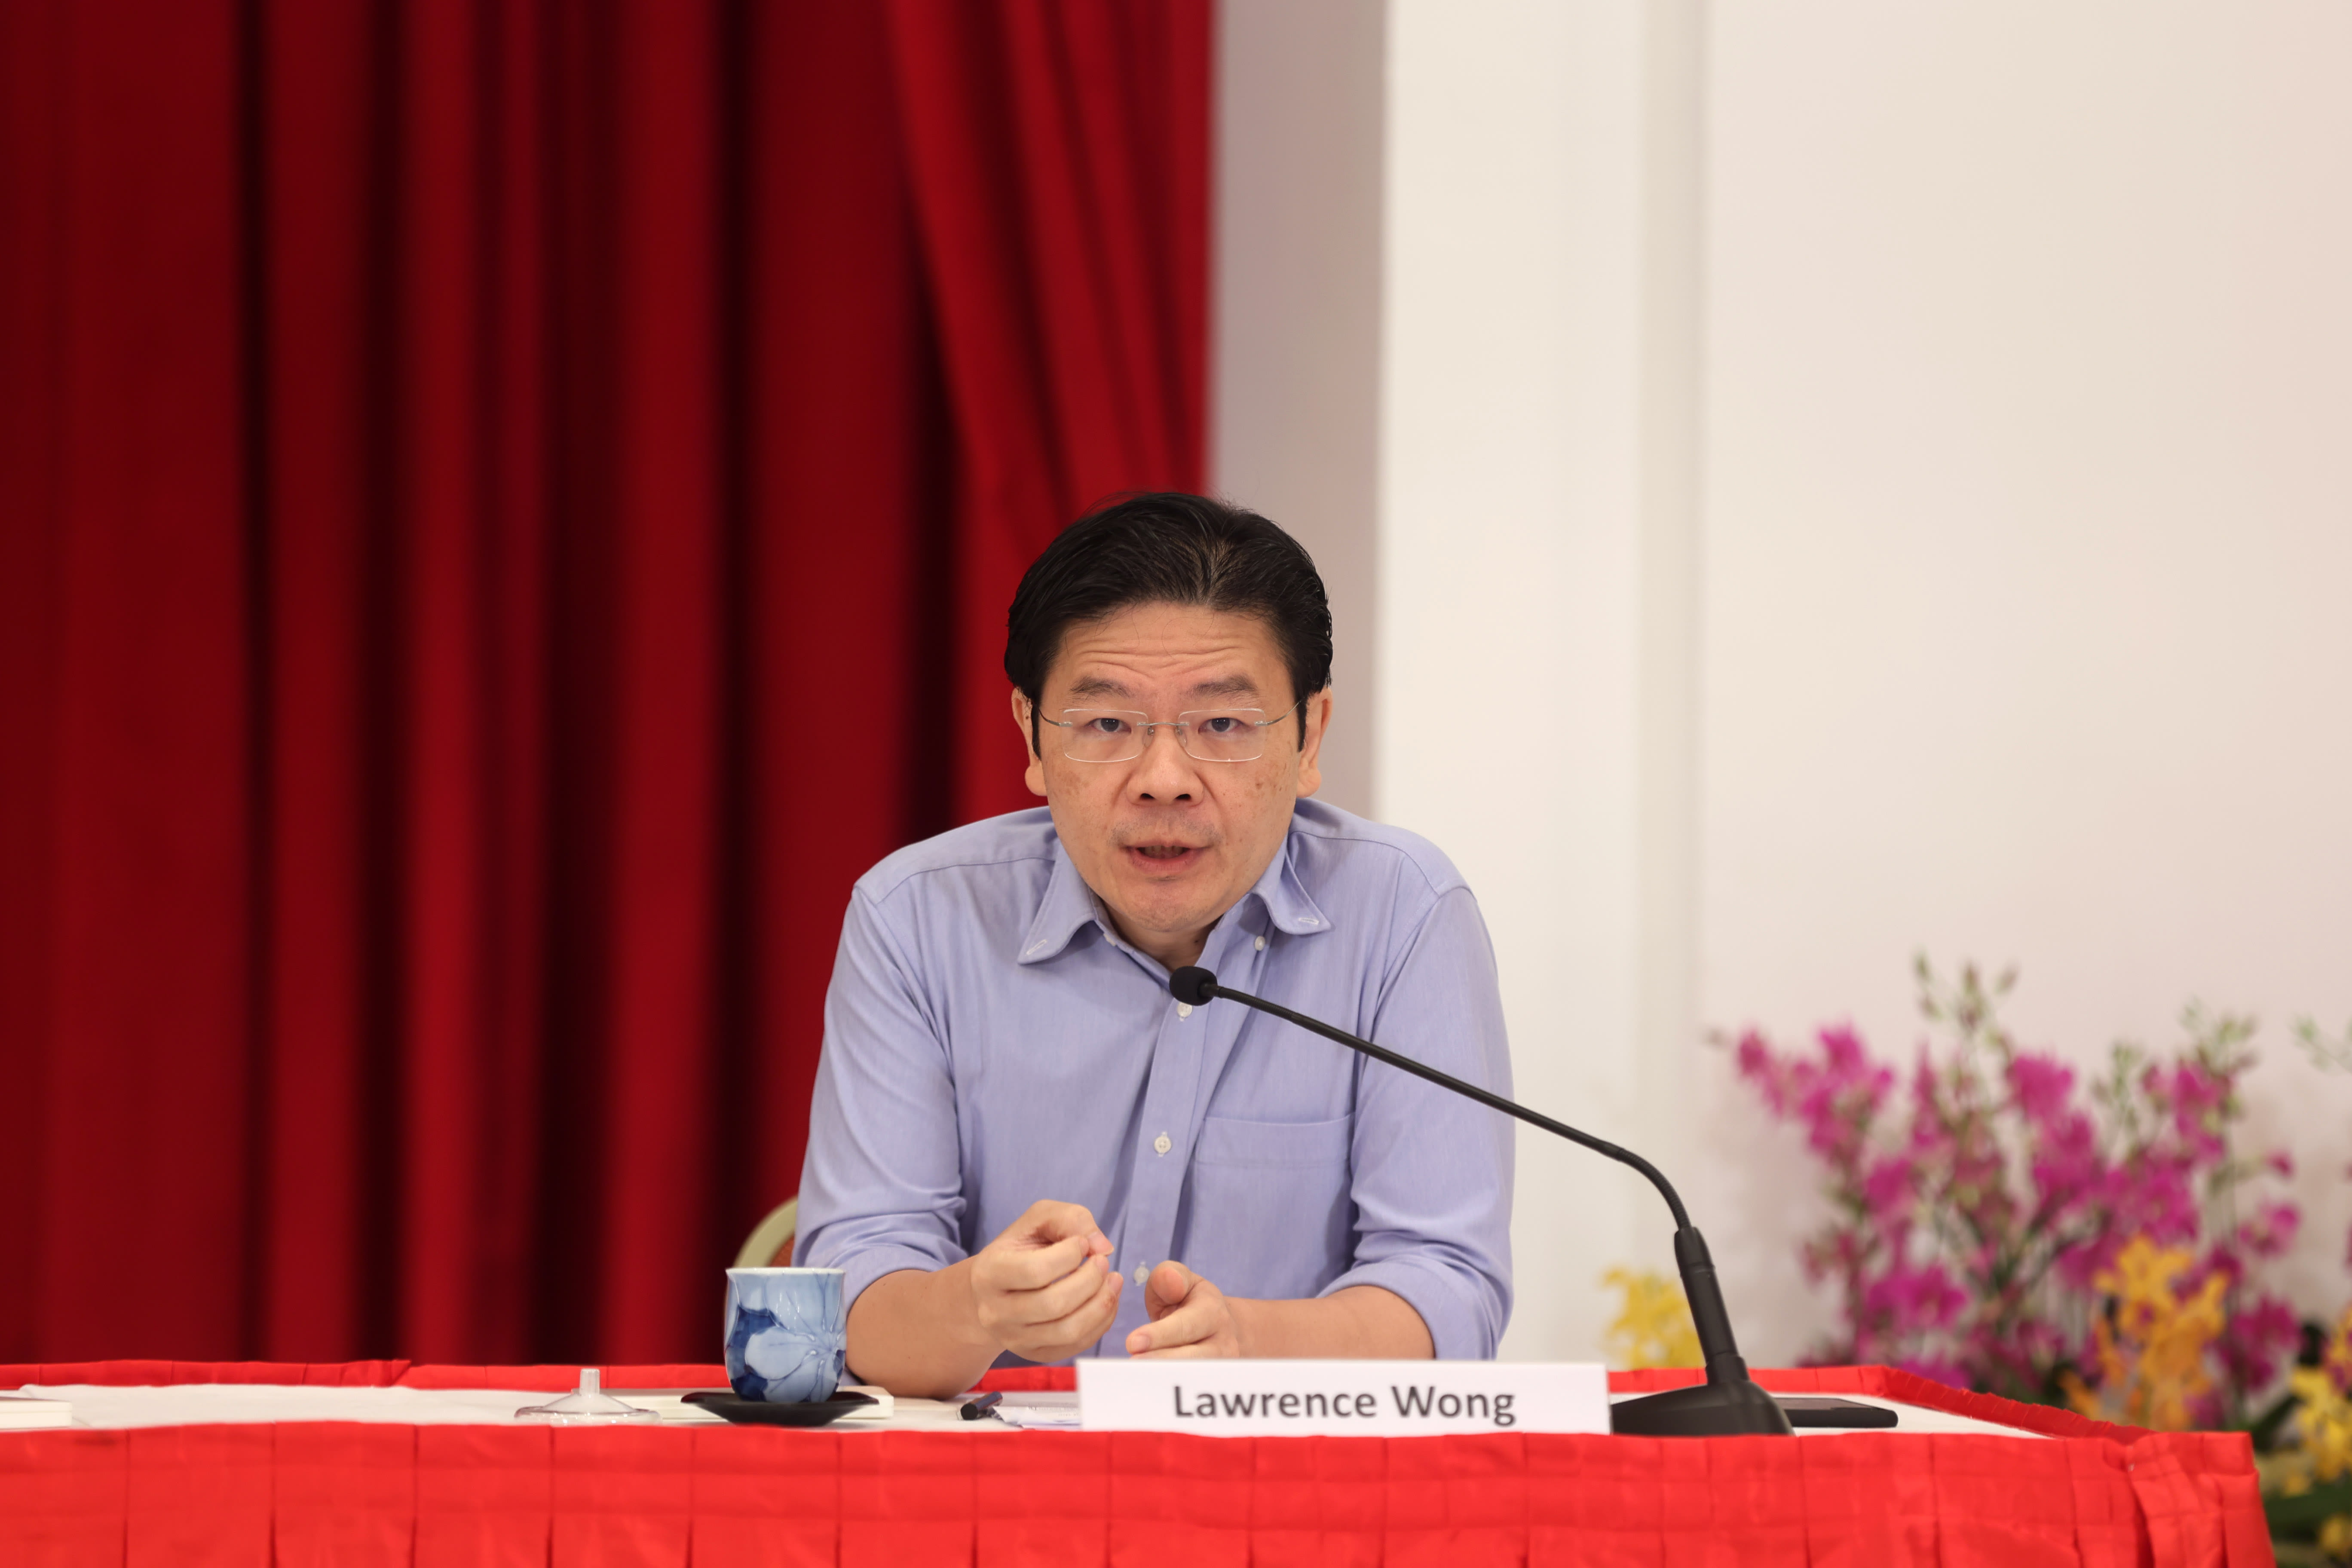 Finance Minister Lawrence Wong speaking during the press conference at the Istana on April 16.